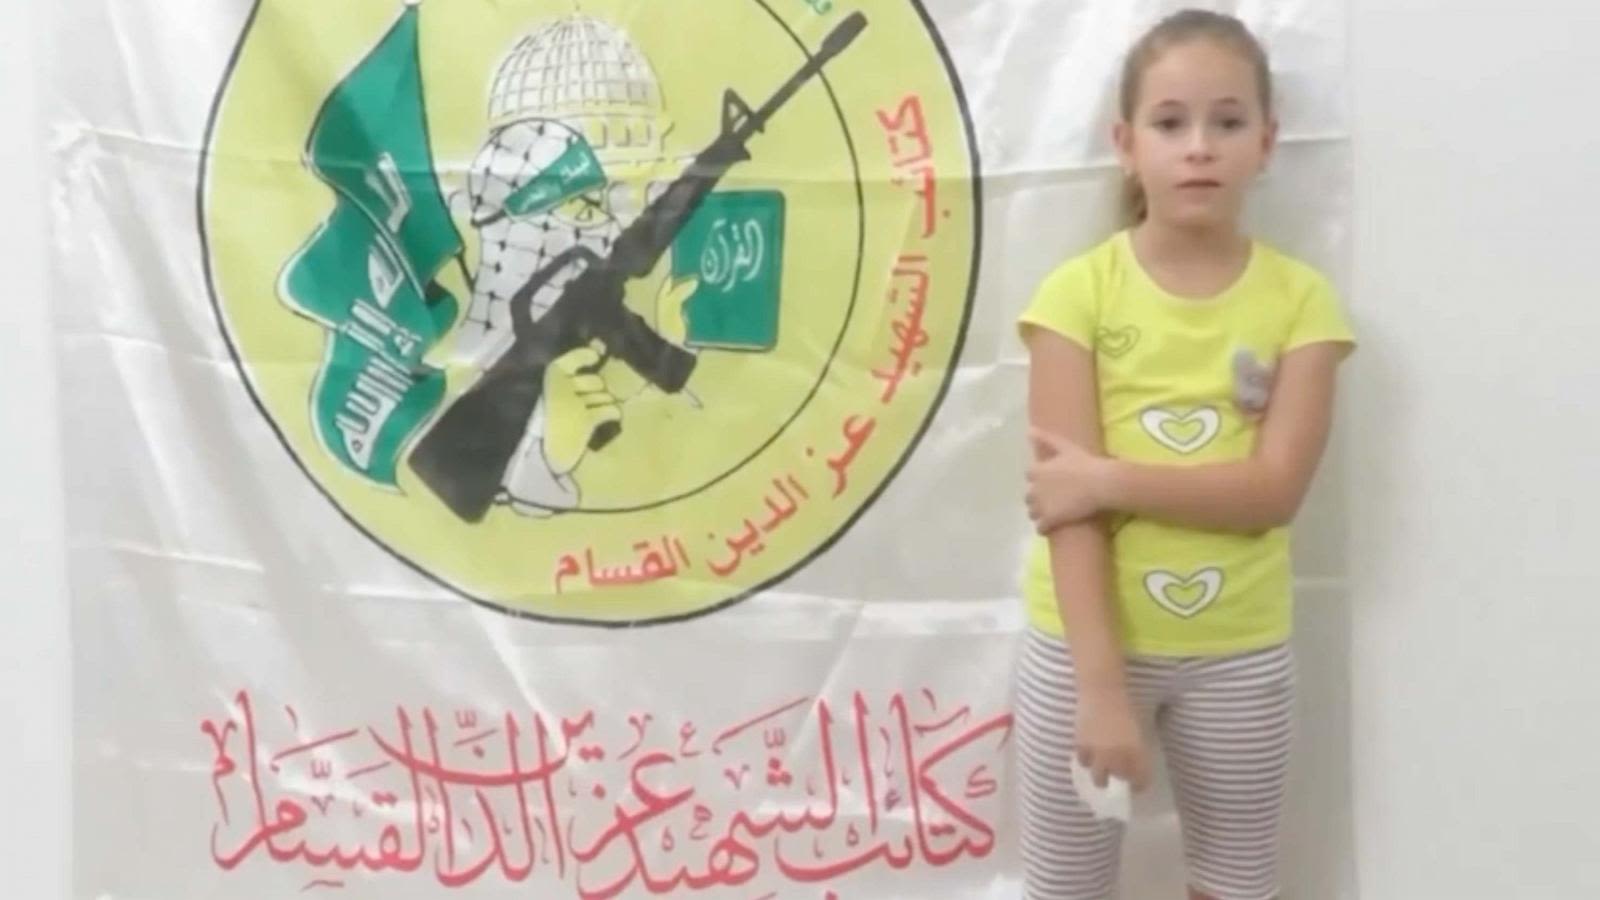 Israel-Gaza live updates: IDF releases Hamas 'psychological terror' video of young hostages